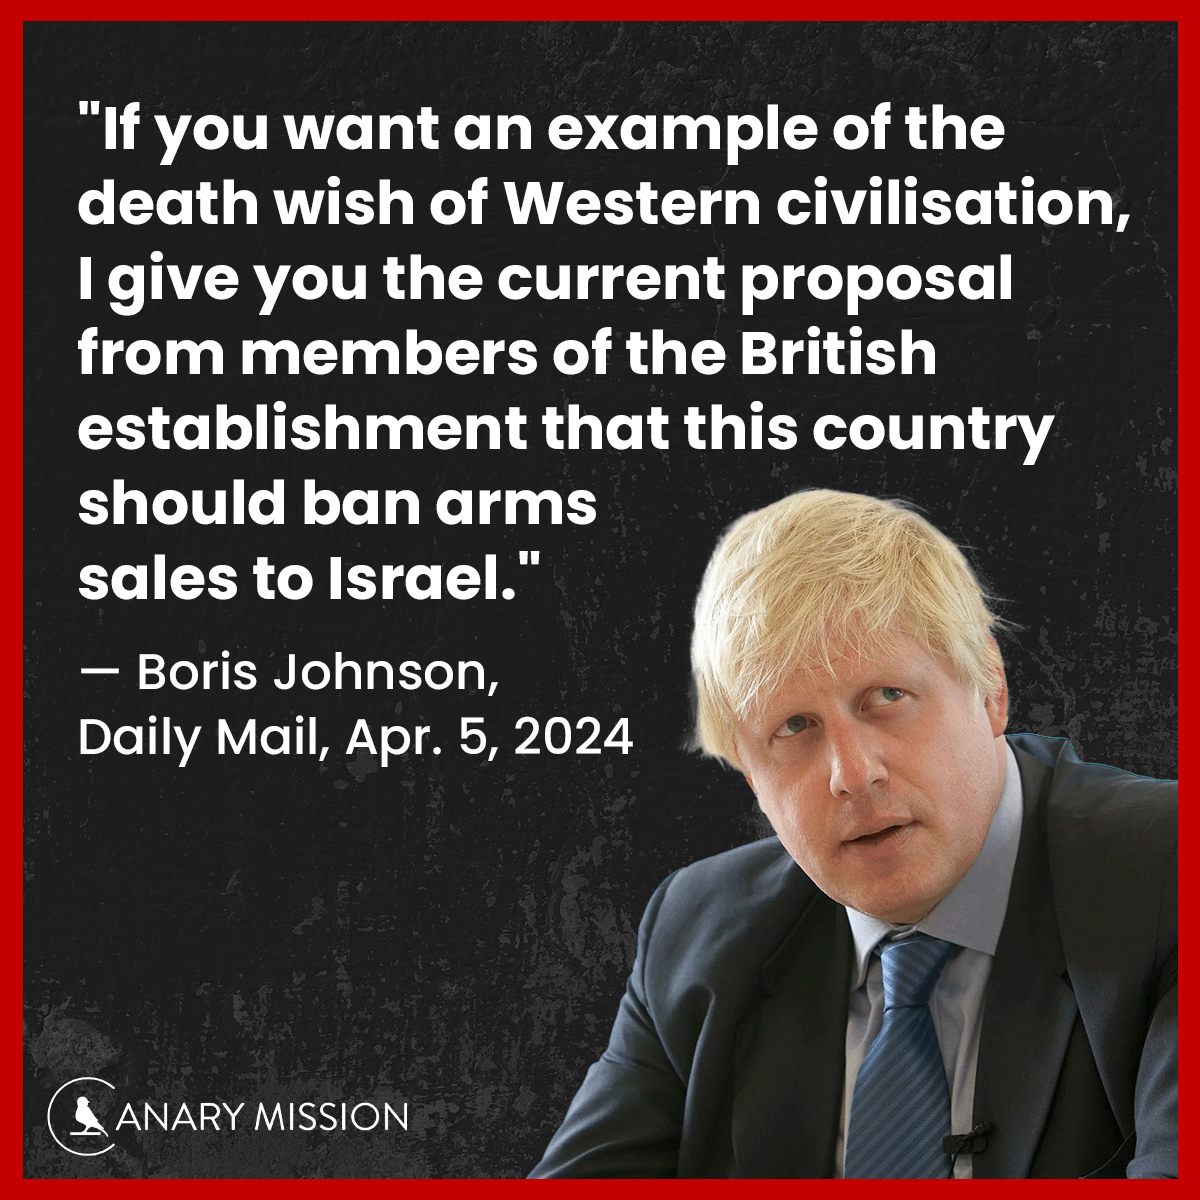 🎯Former UK Prime Minister @BorisJohnson: 'If you want an example of the death wish of Western civilisation, I give you the current proposal from members of the British establishment that this country should ban arms sales to Israel.' dailymail.co.uk/debate/article…